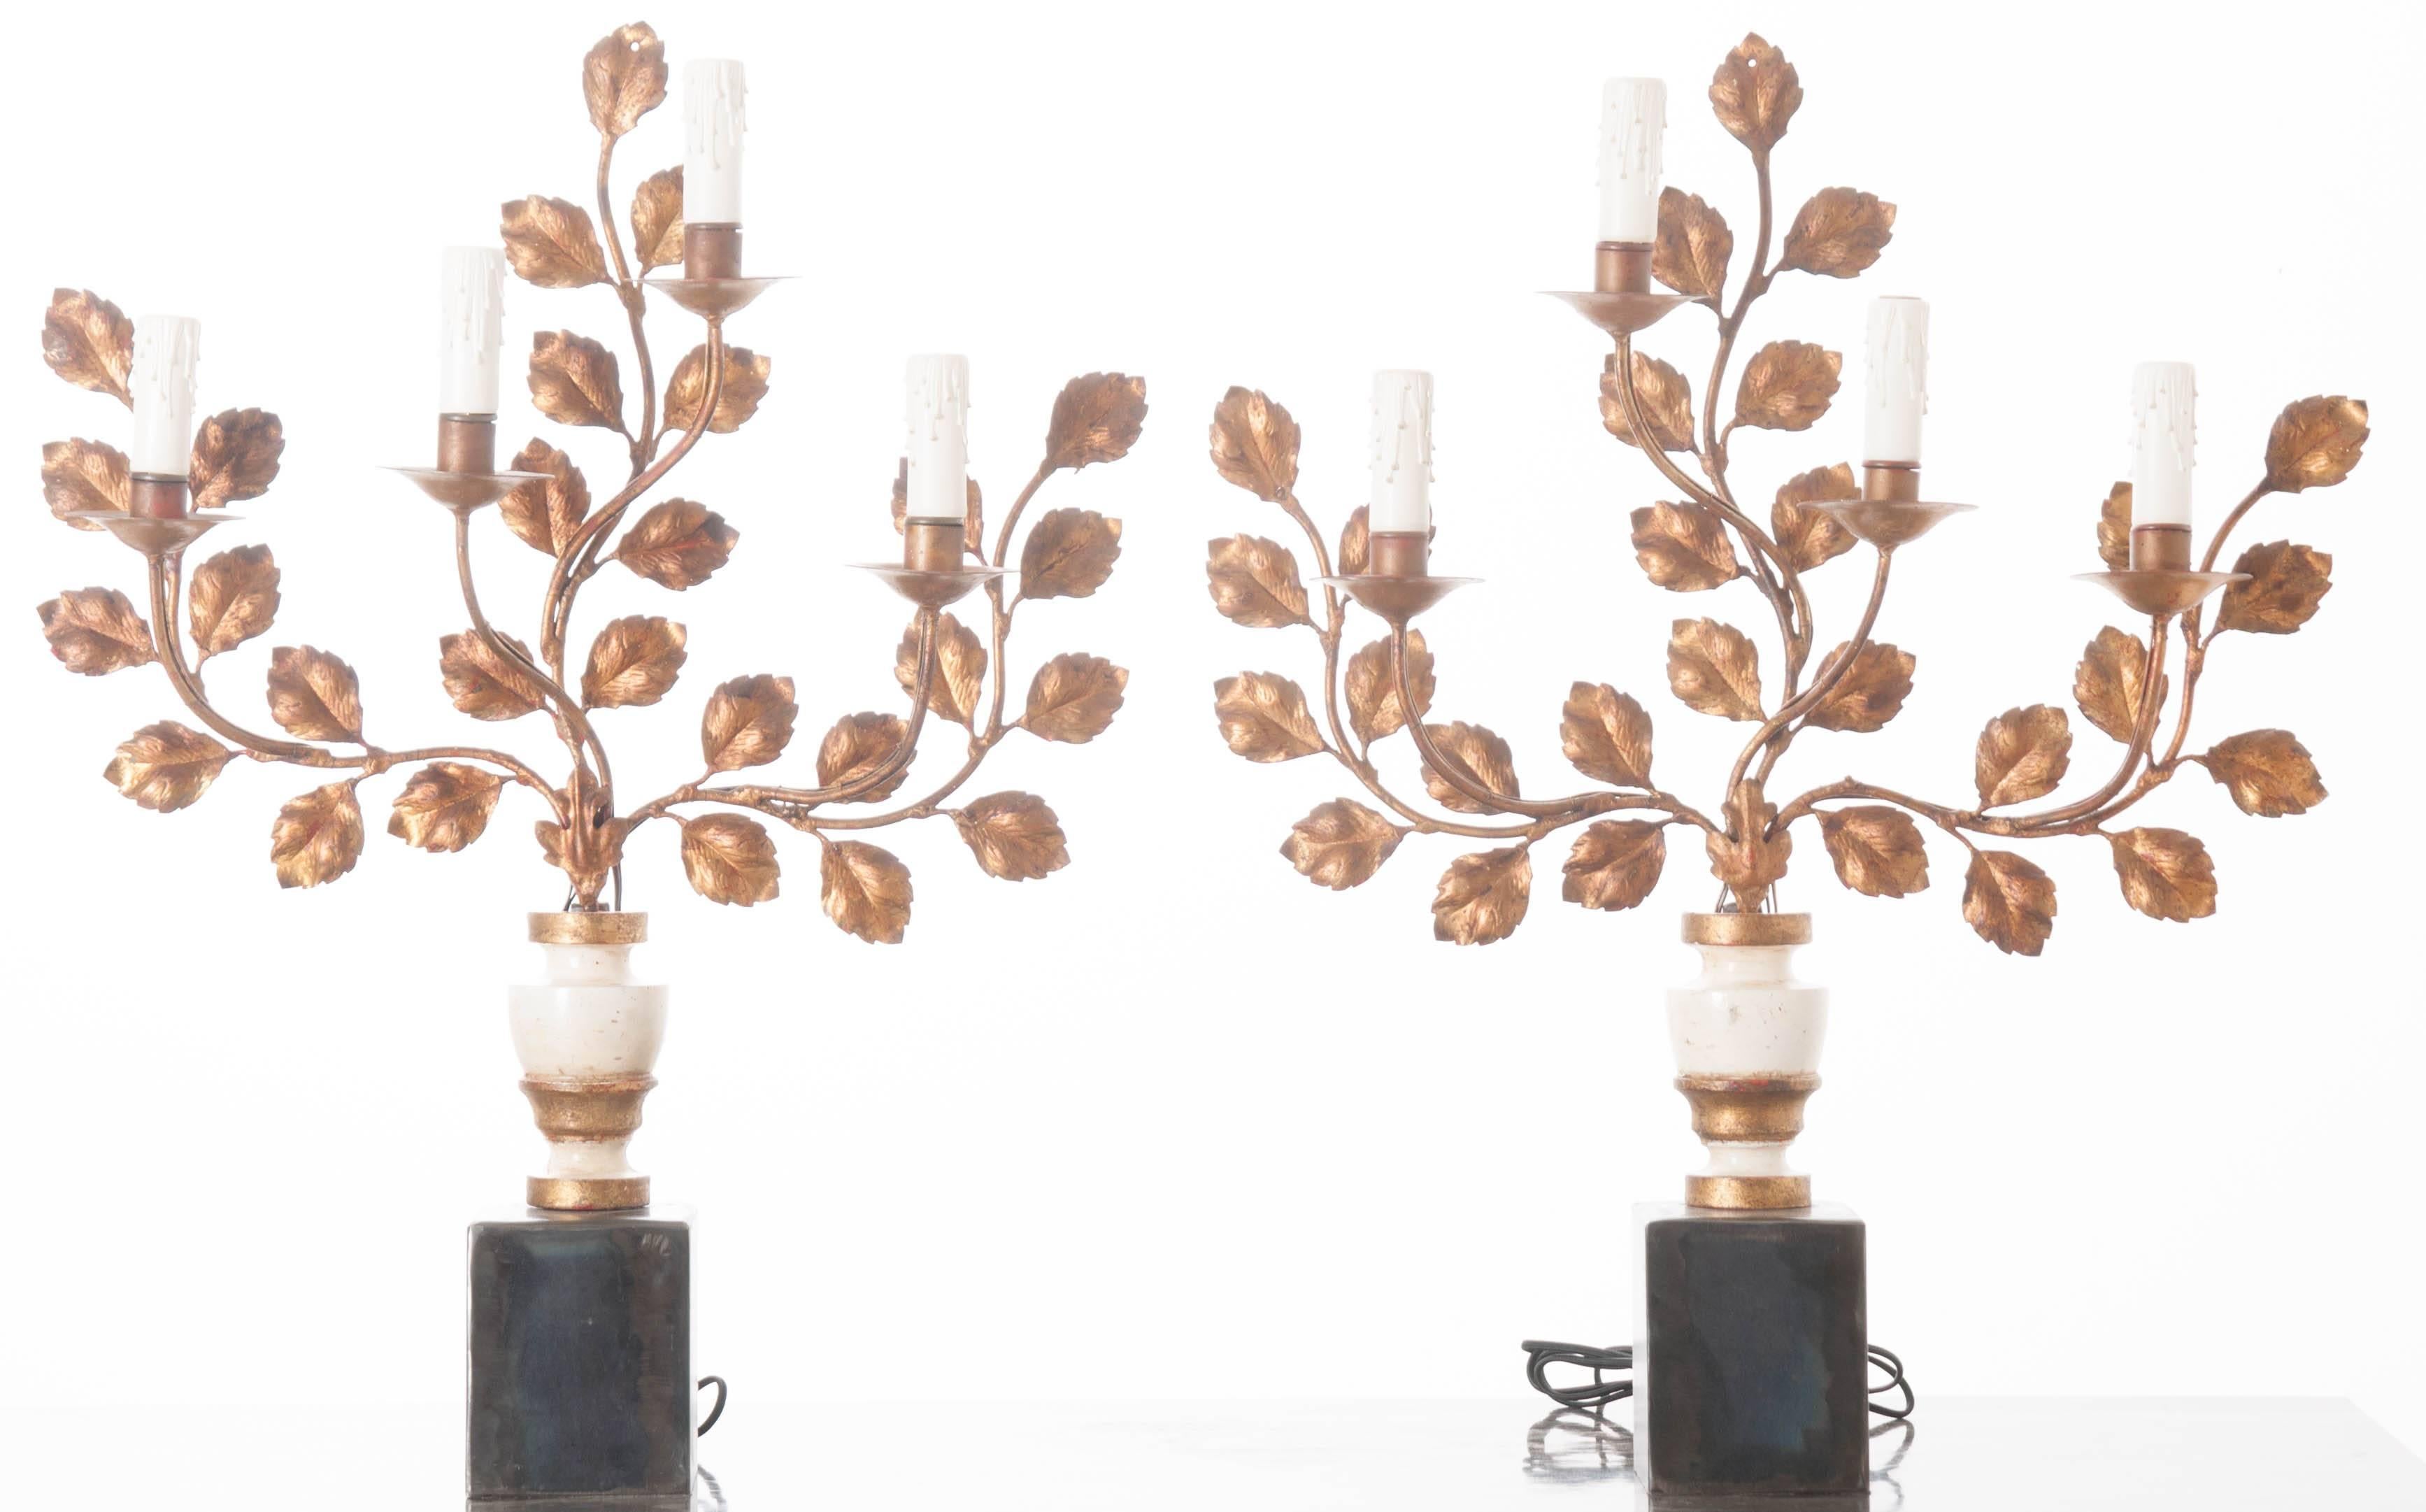 An extraordinary pair of 19th century four-light sconces that have been newly repurposed to function as lamps. Custom metal bases were fabricated to provide a surface to which the antique sconces could be mounted. These exquisite lamps are formed